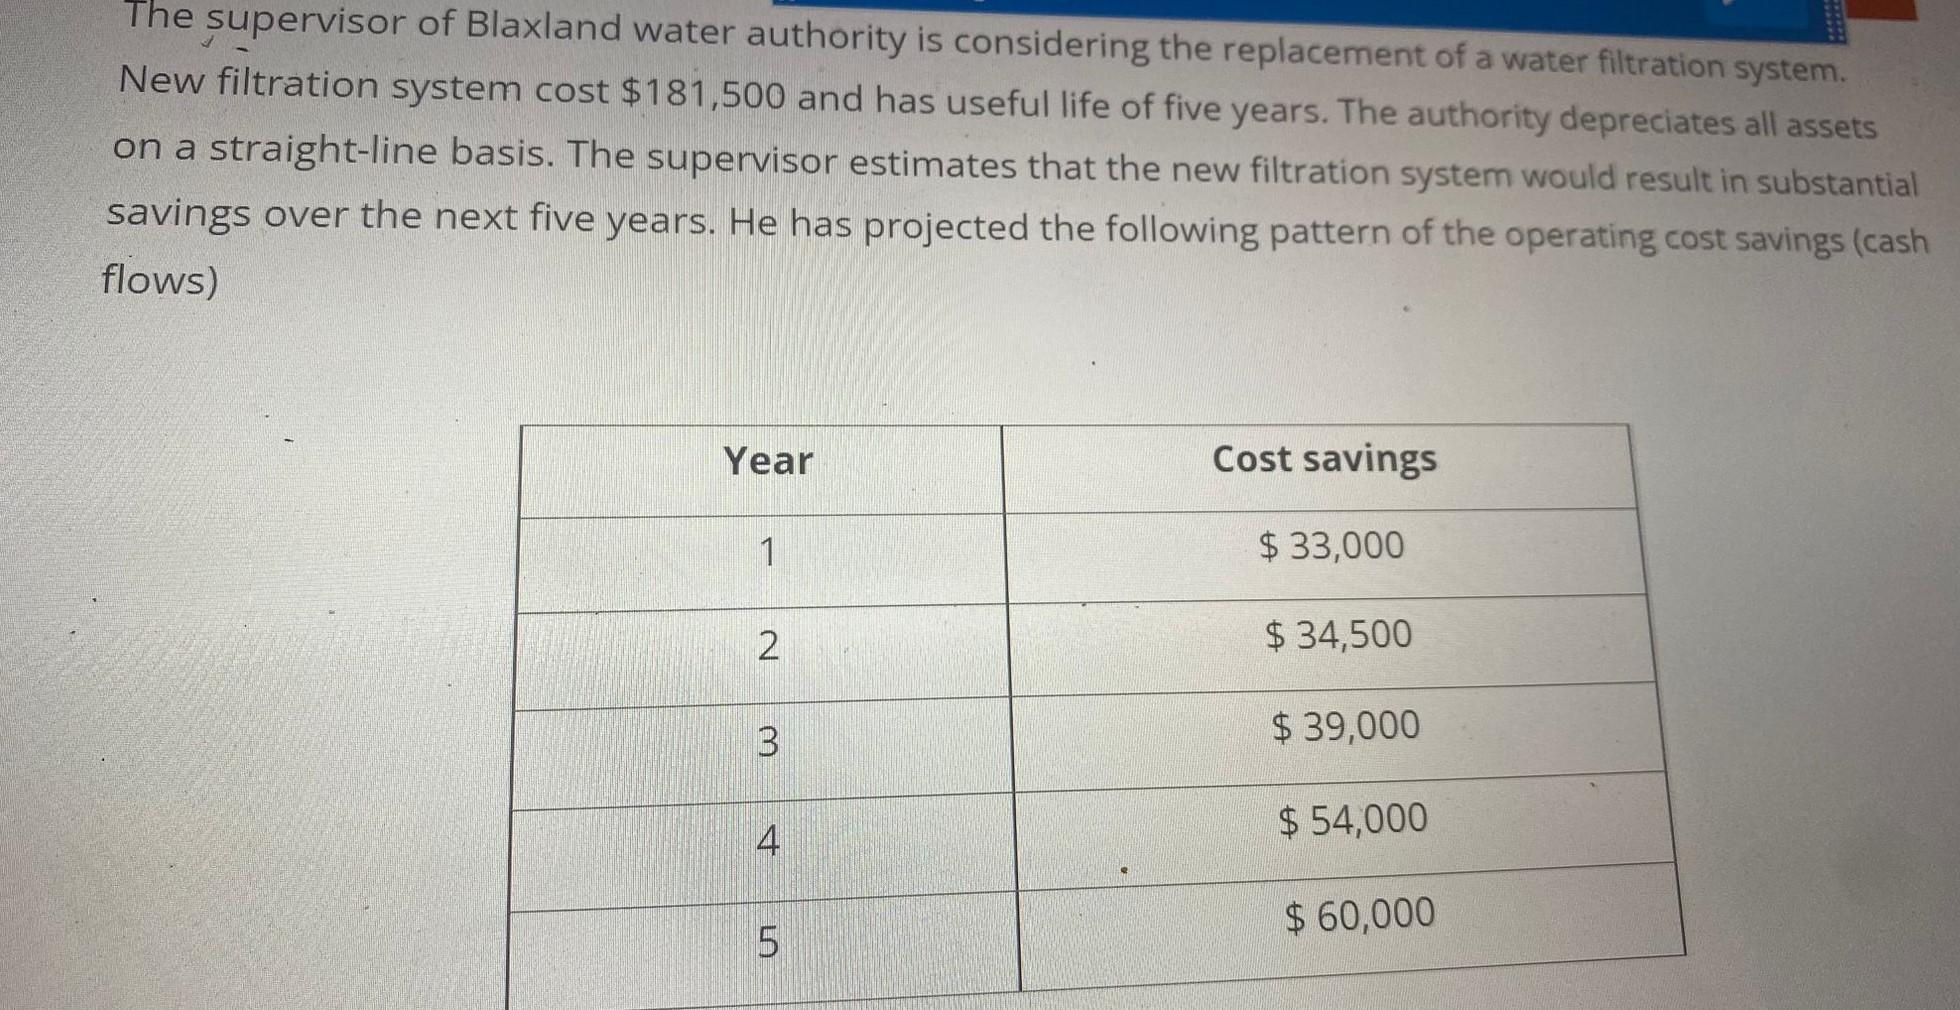 The supervisor of Blaxland water authority is considering the replacement of a water filtration system. New filtration system